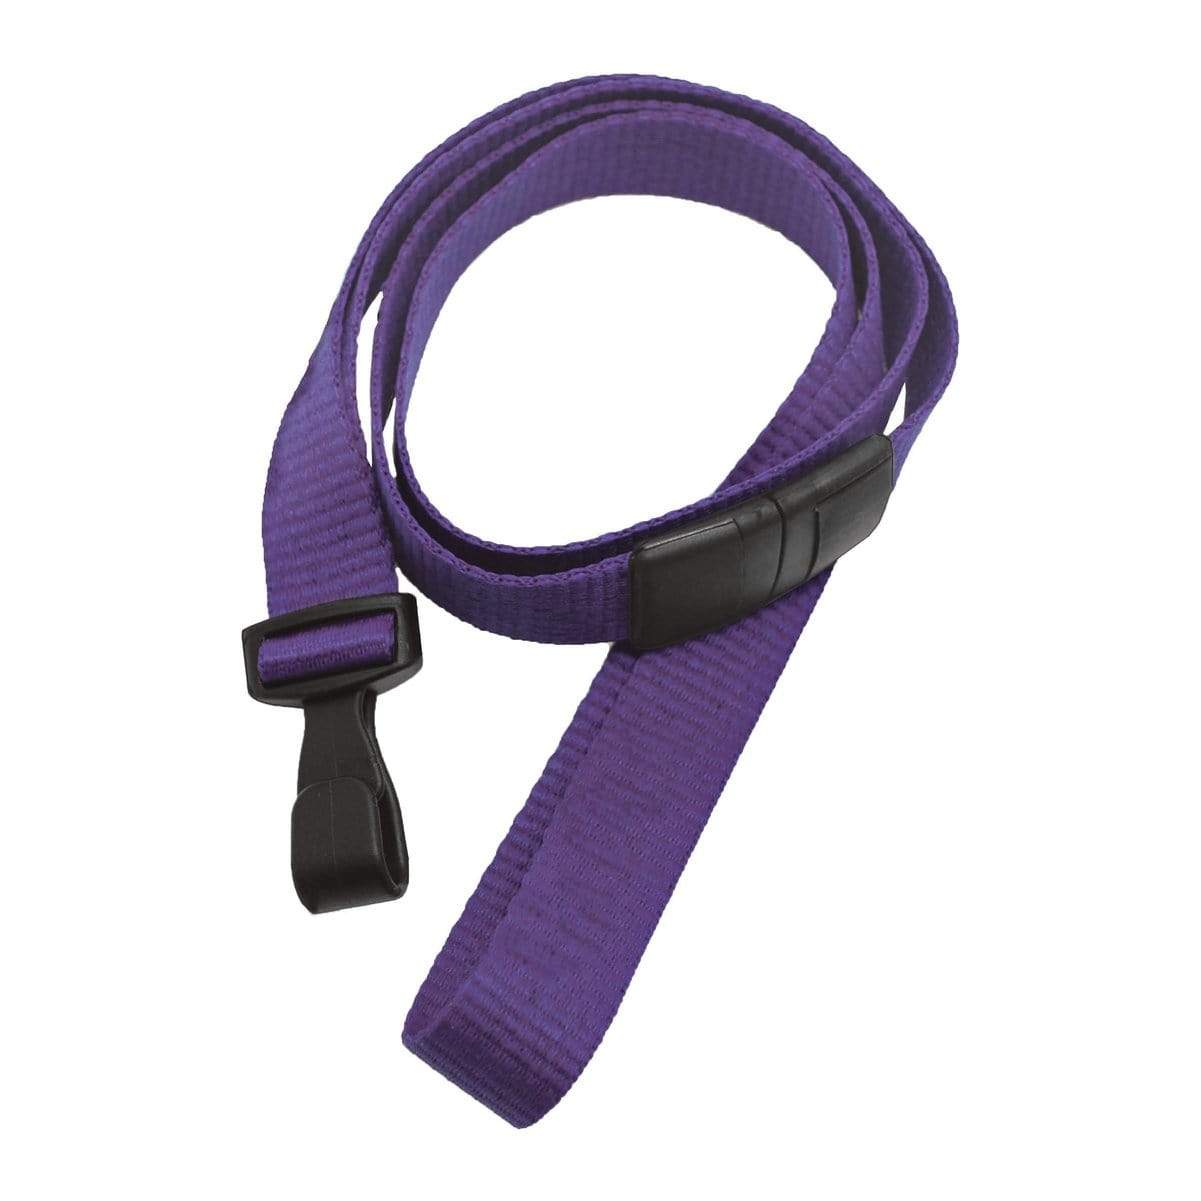 Double-Ended Safety Retractable Lanyards: With 5/8 Heavy-Duty